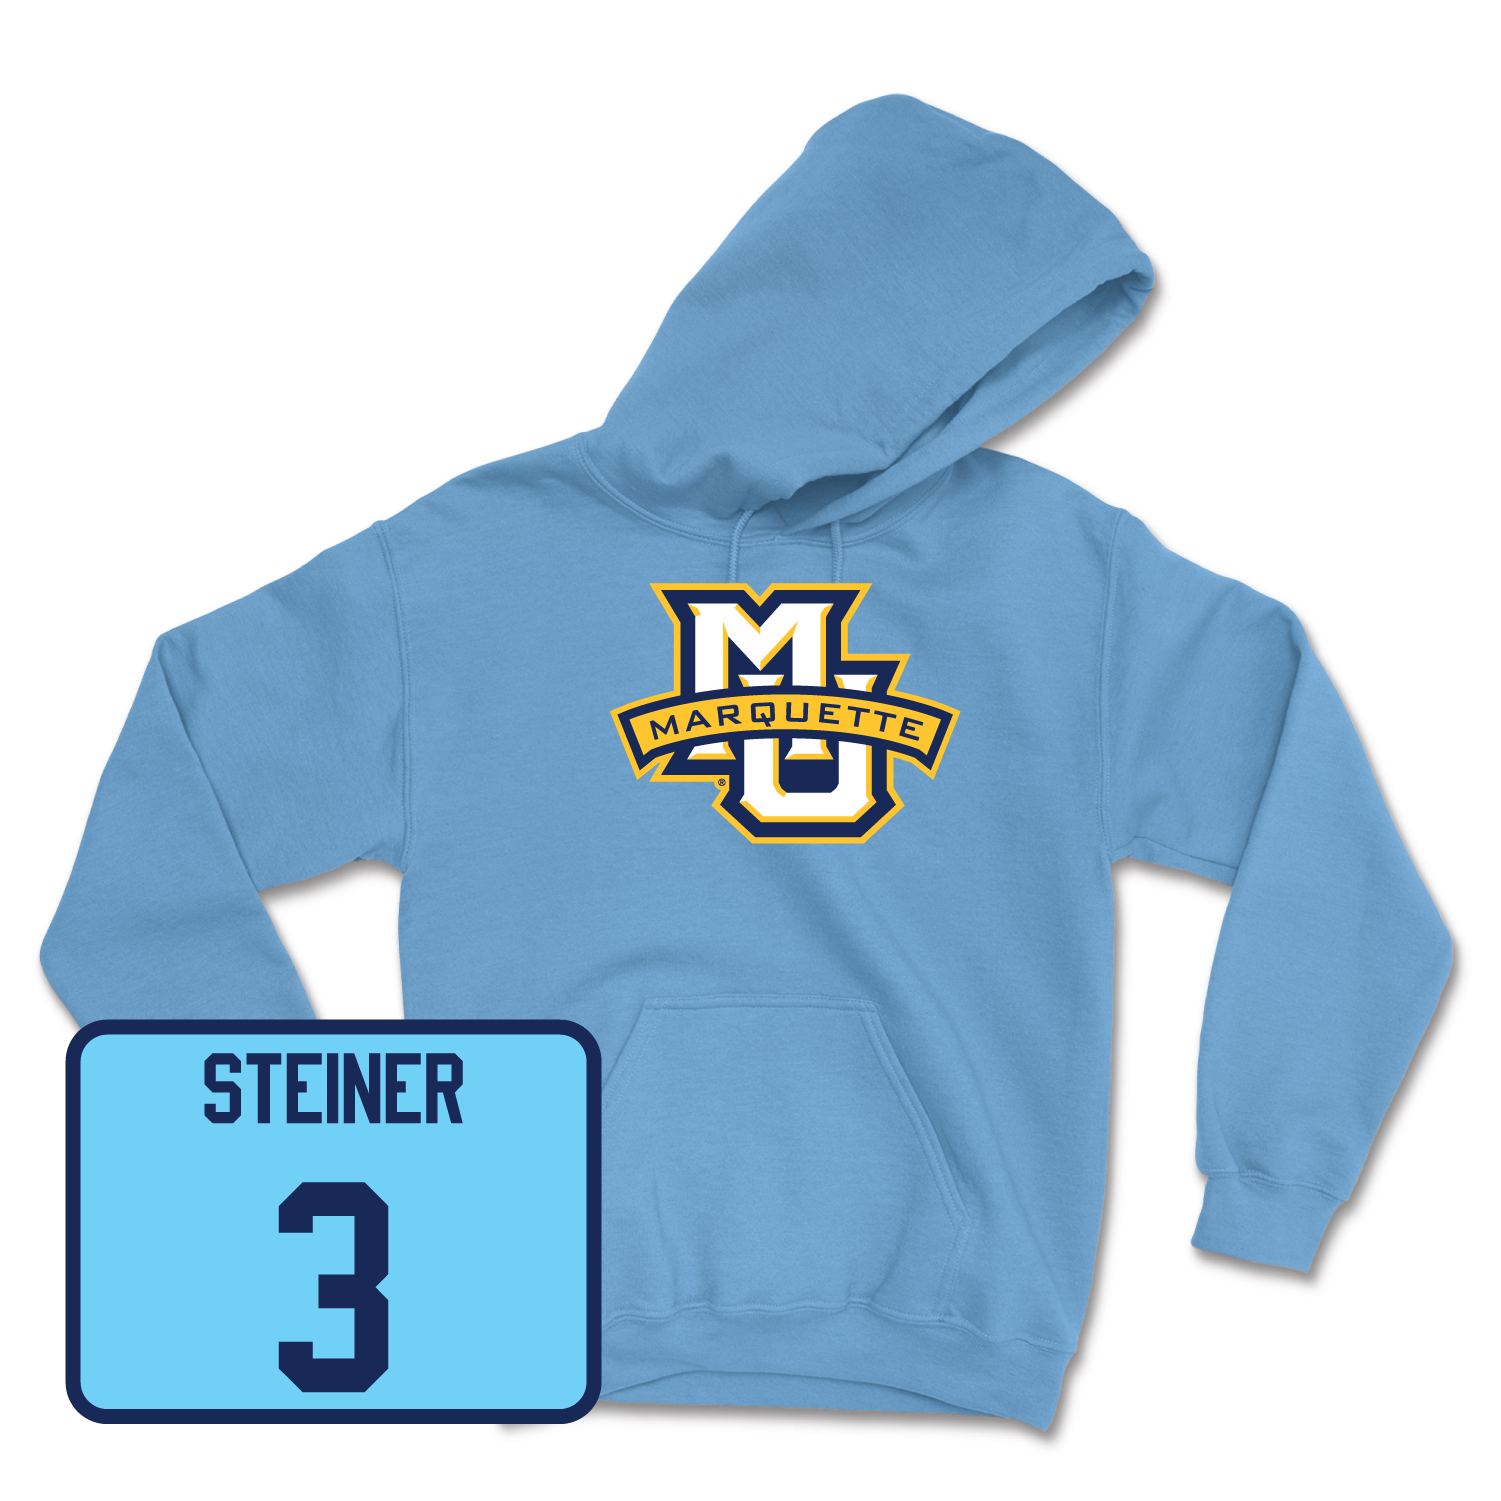 Championship Blue Women's Lacrosse Marquette Hoodie 2 2X-Large / Leigh Steiner | #3